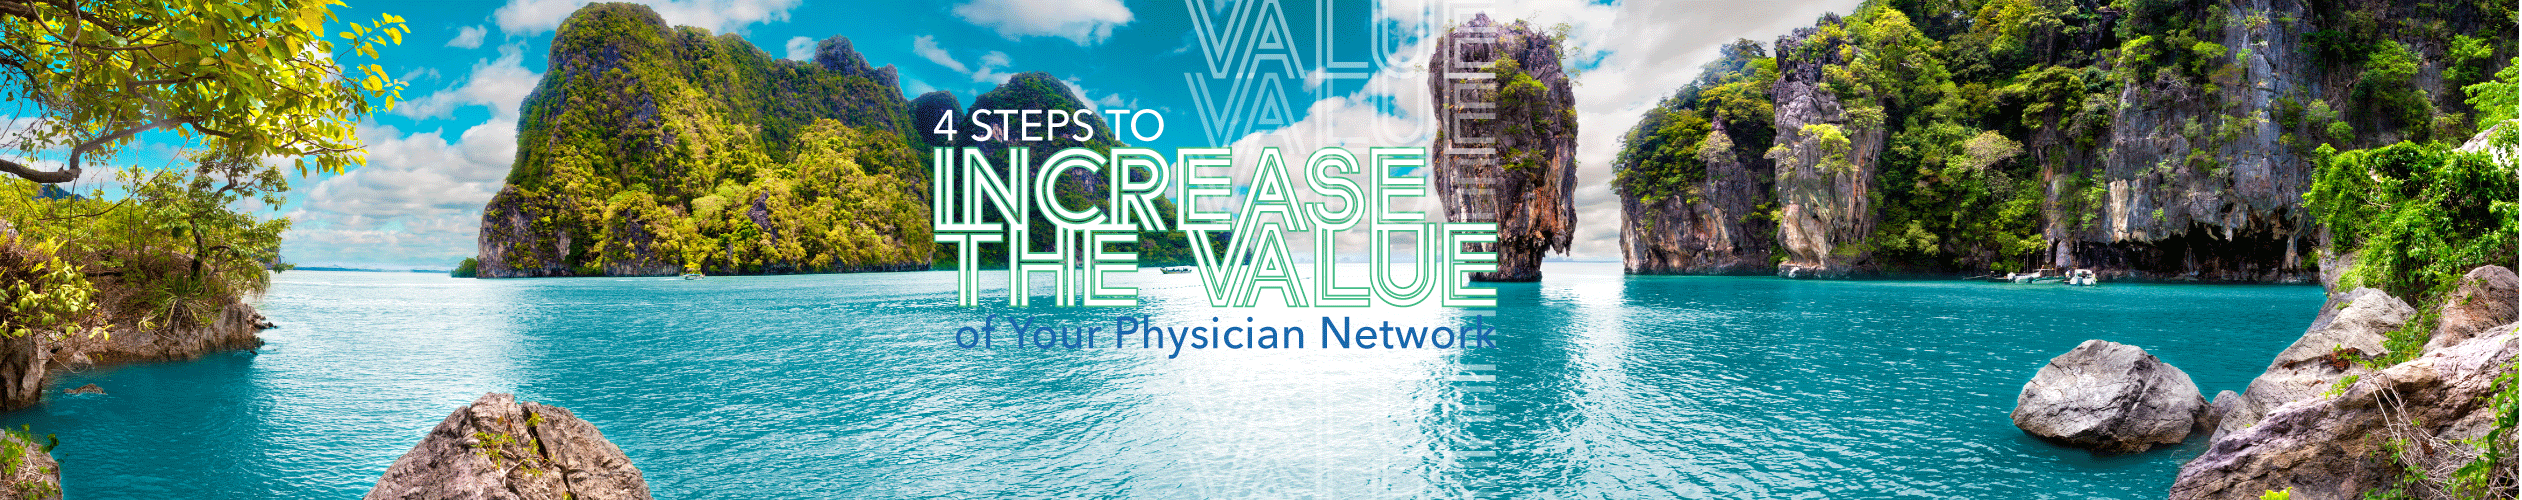 4 Steps to Increase the Value of Your Physician Network.